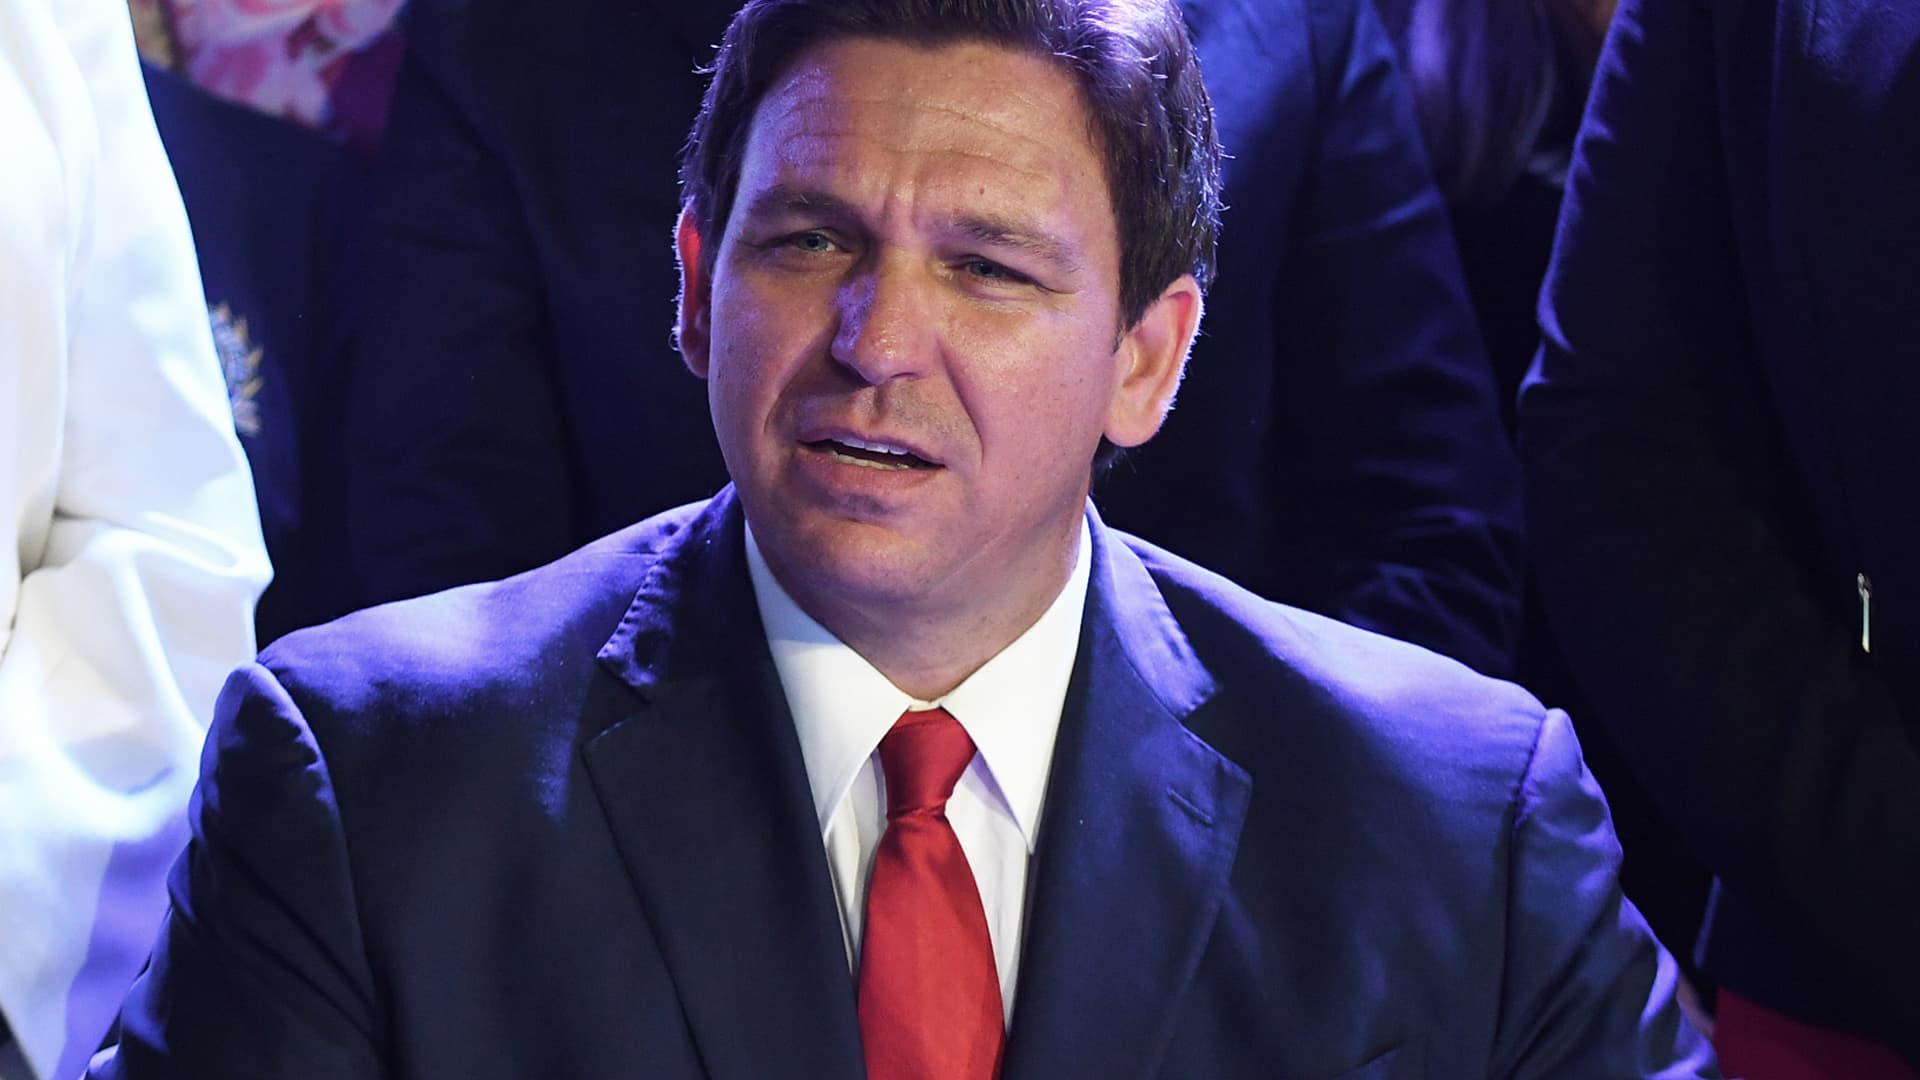 ron-desantis-quietly-signs-6-week-abortion-ban-into-law-in-florida